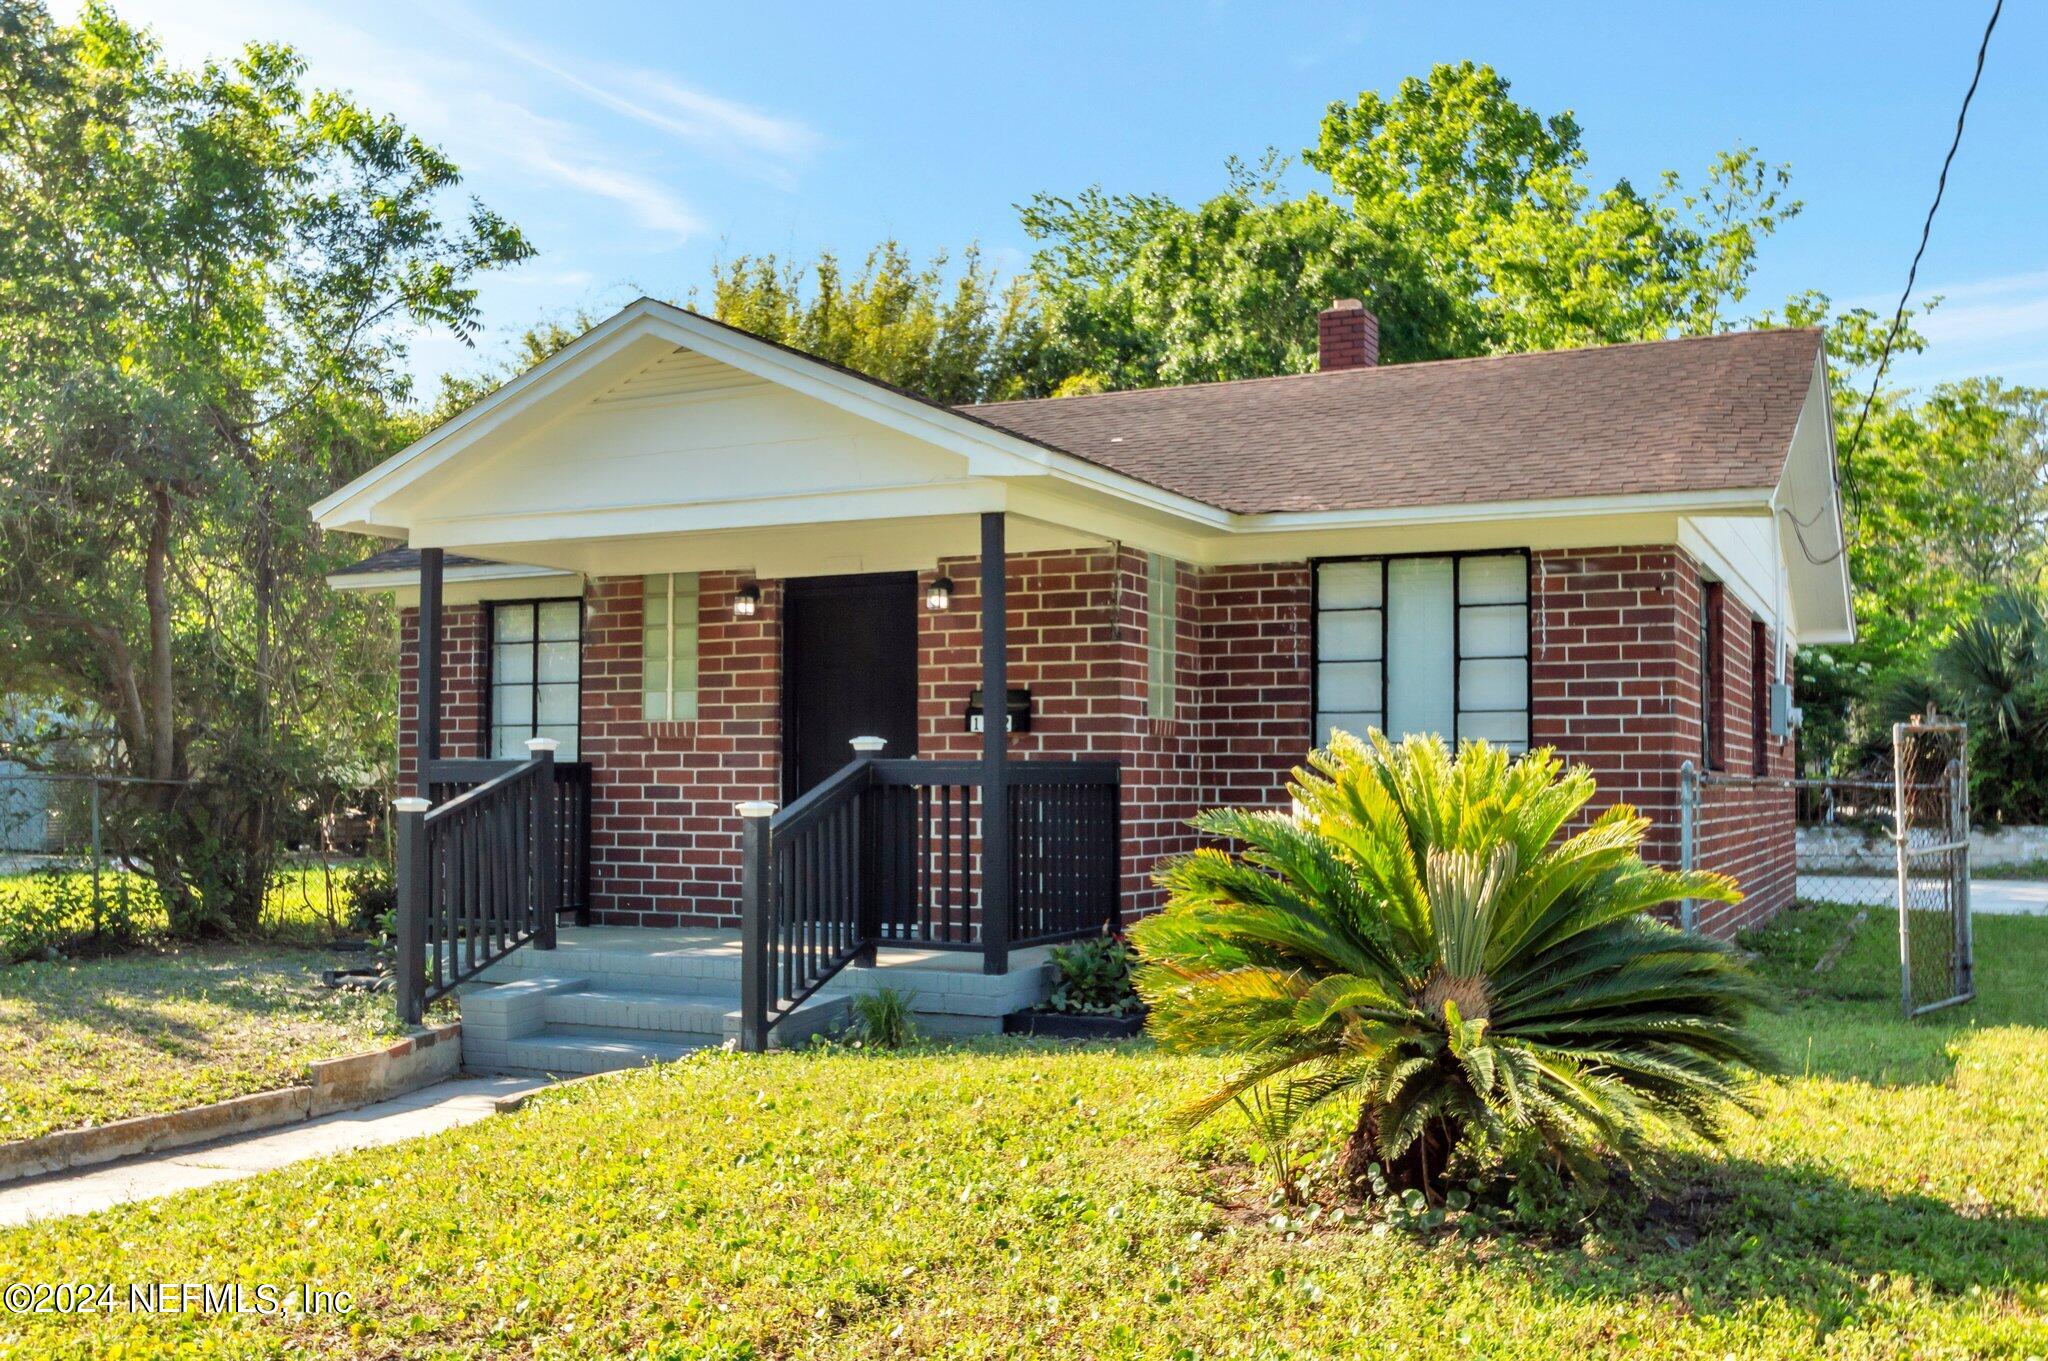 Jacksonville, FL home for sale located at 1532 W 16th Street, Jacksonville, FL 32209